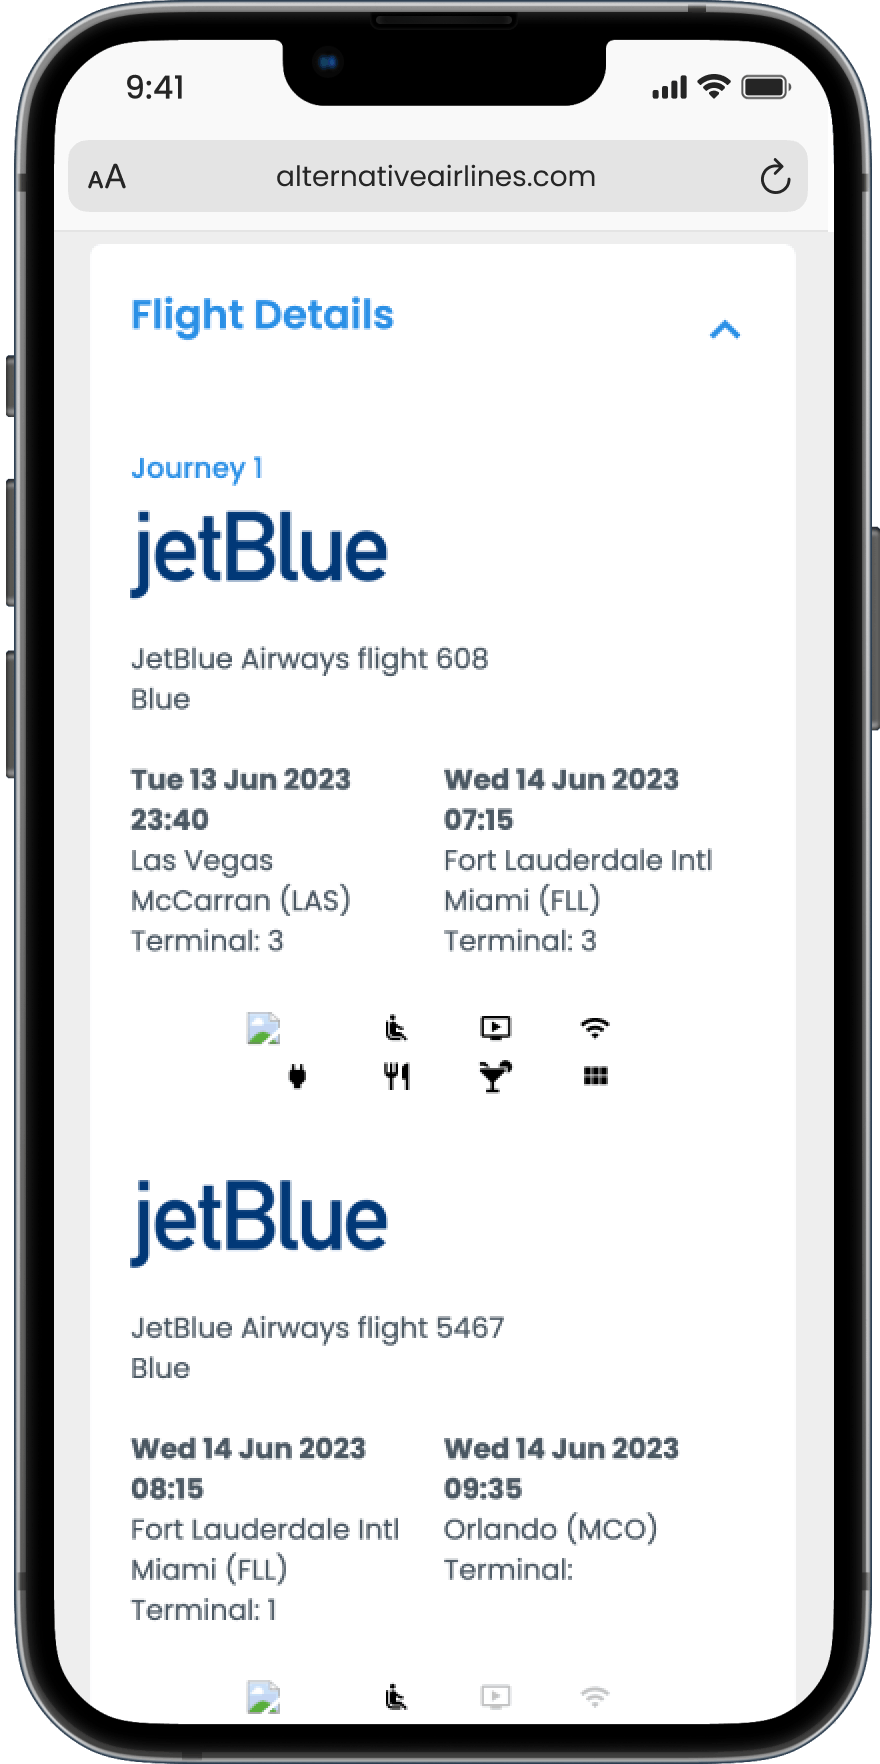 Step 4 - Confirm your flights with jetBlue